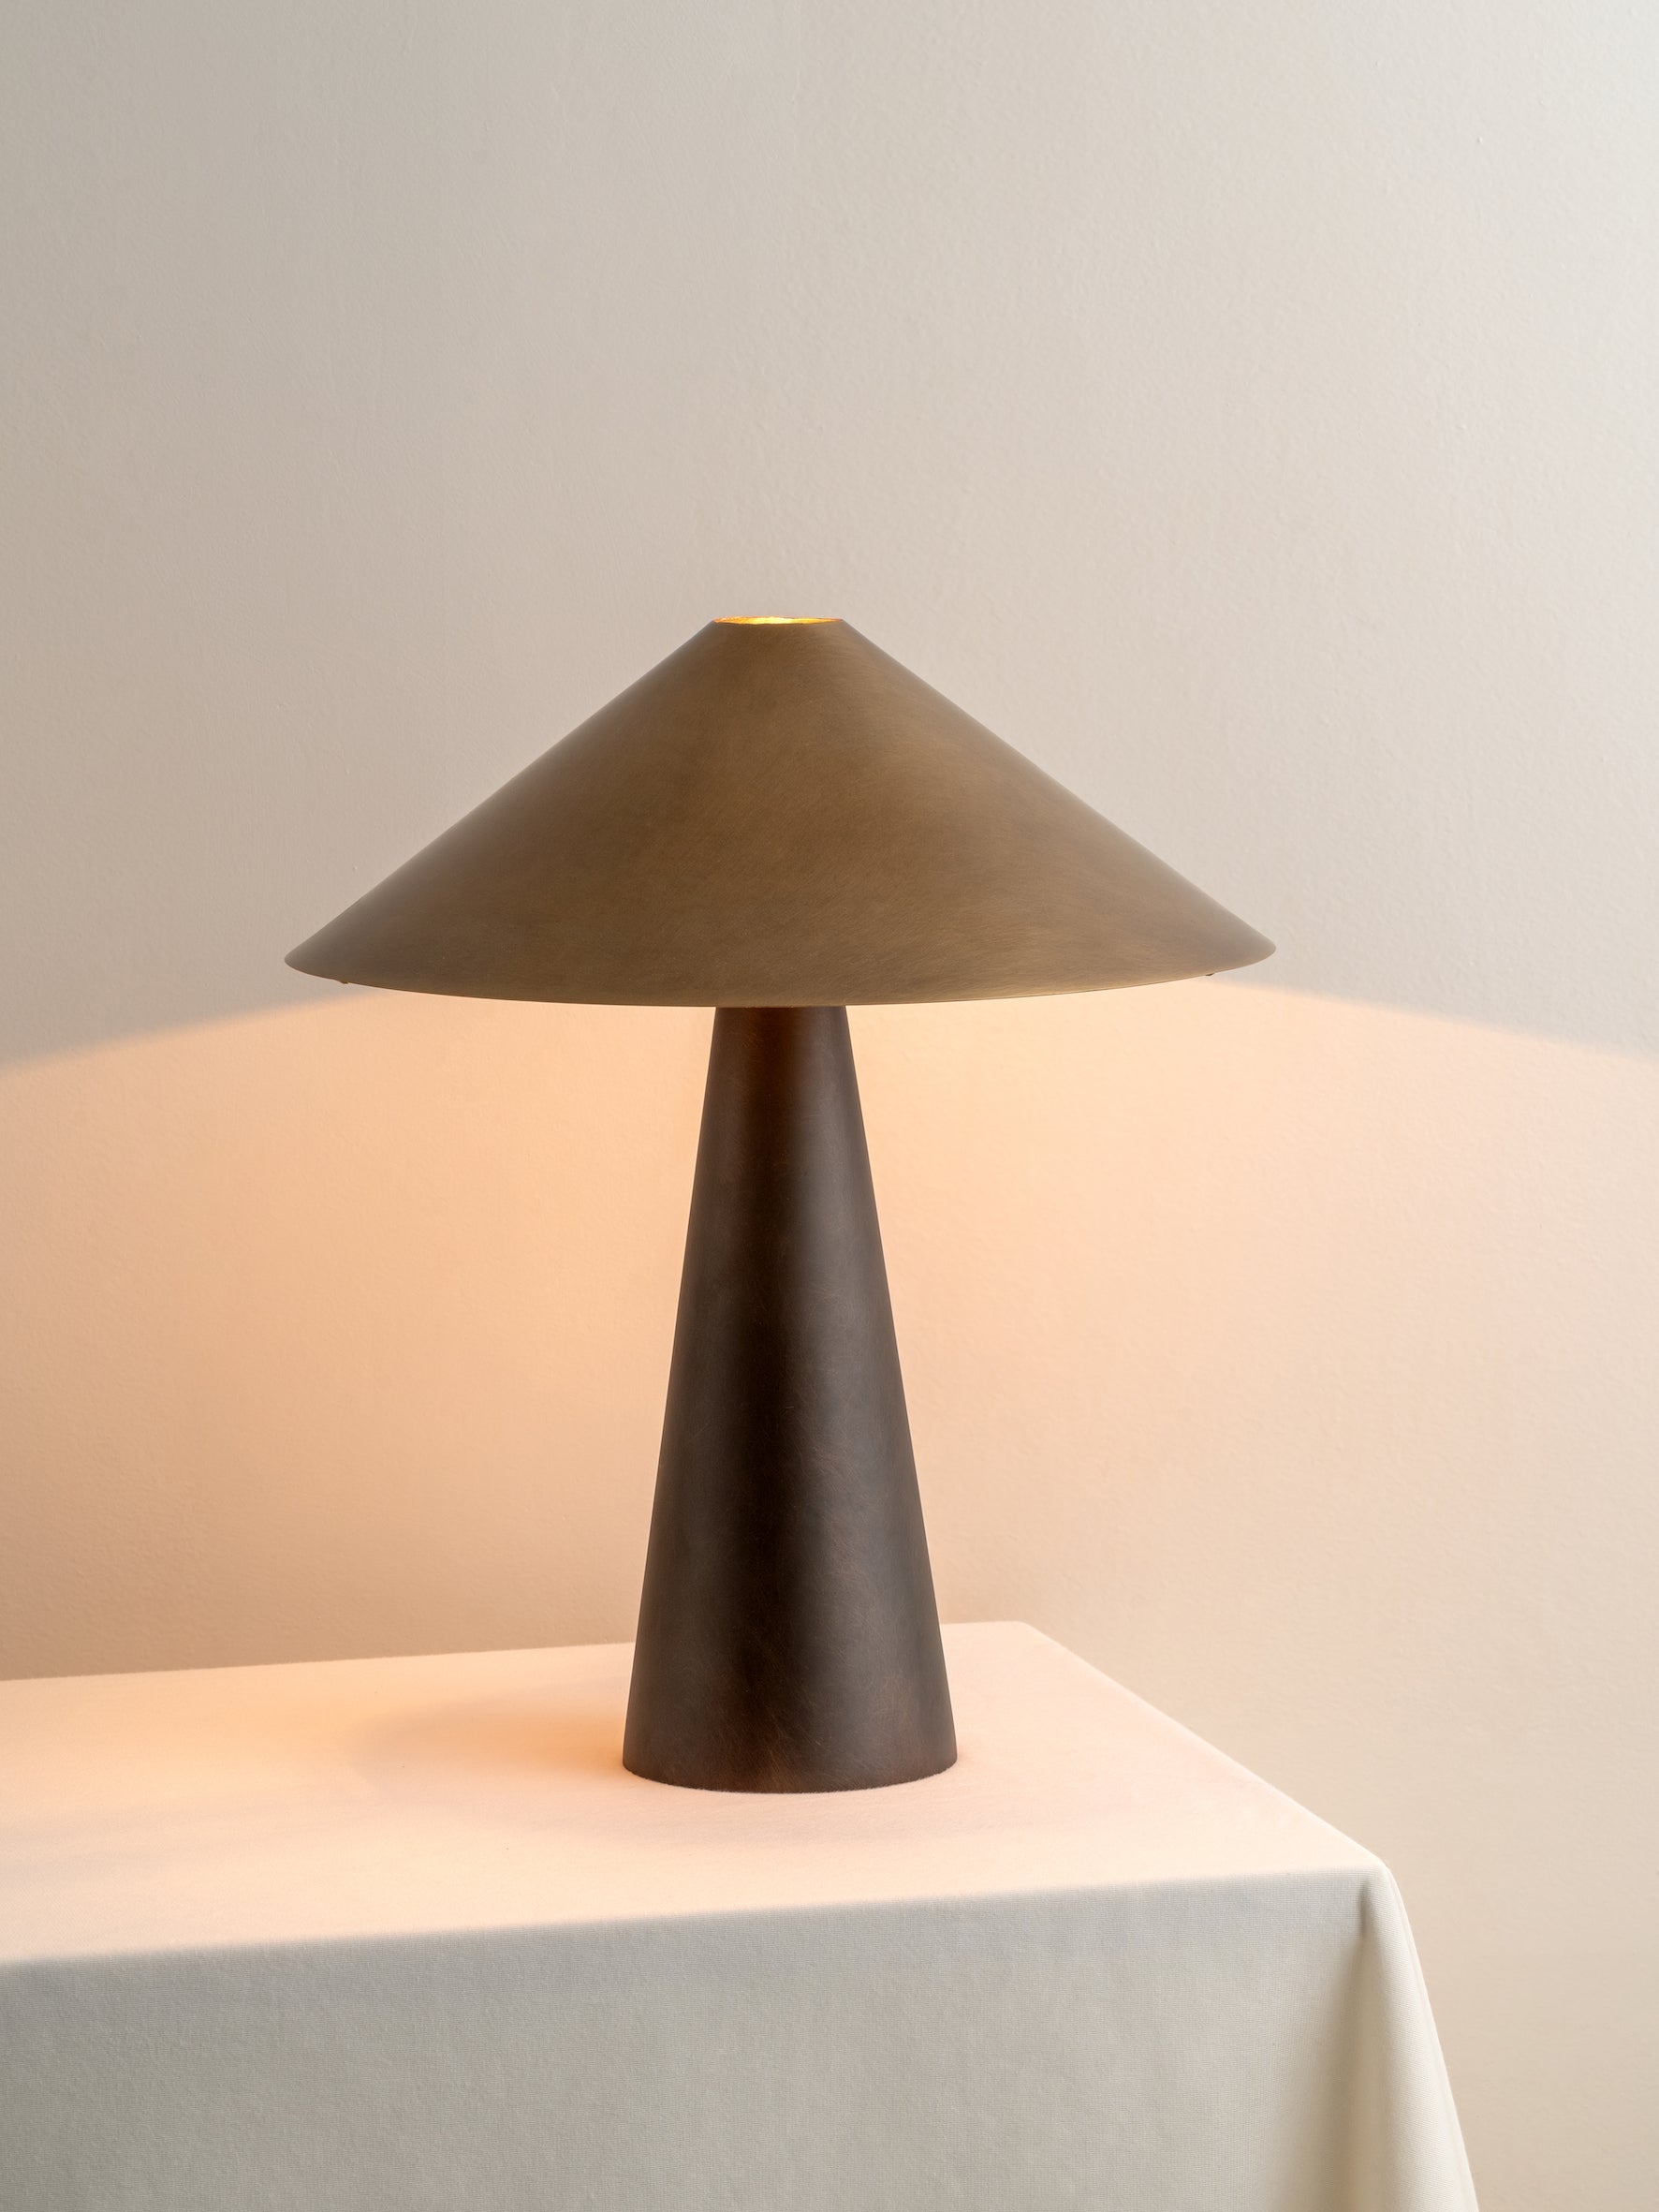 Orta - aged brass and bronze cone table lamp | Table Lamp | Lights & Lamps Inc | Modern Affordable Designer Lighting | USA